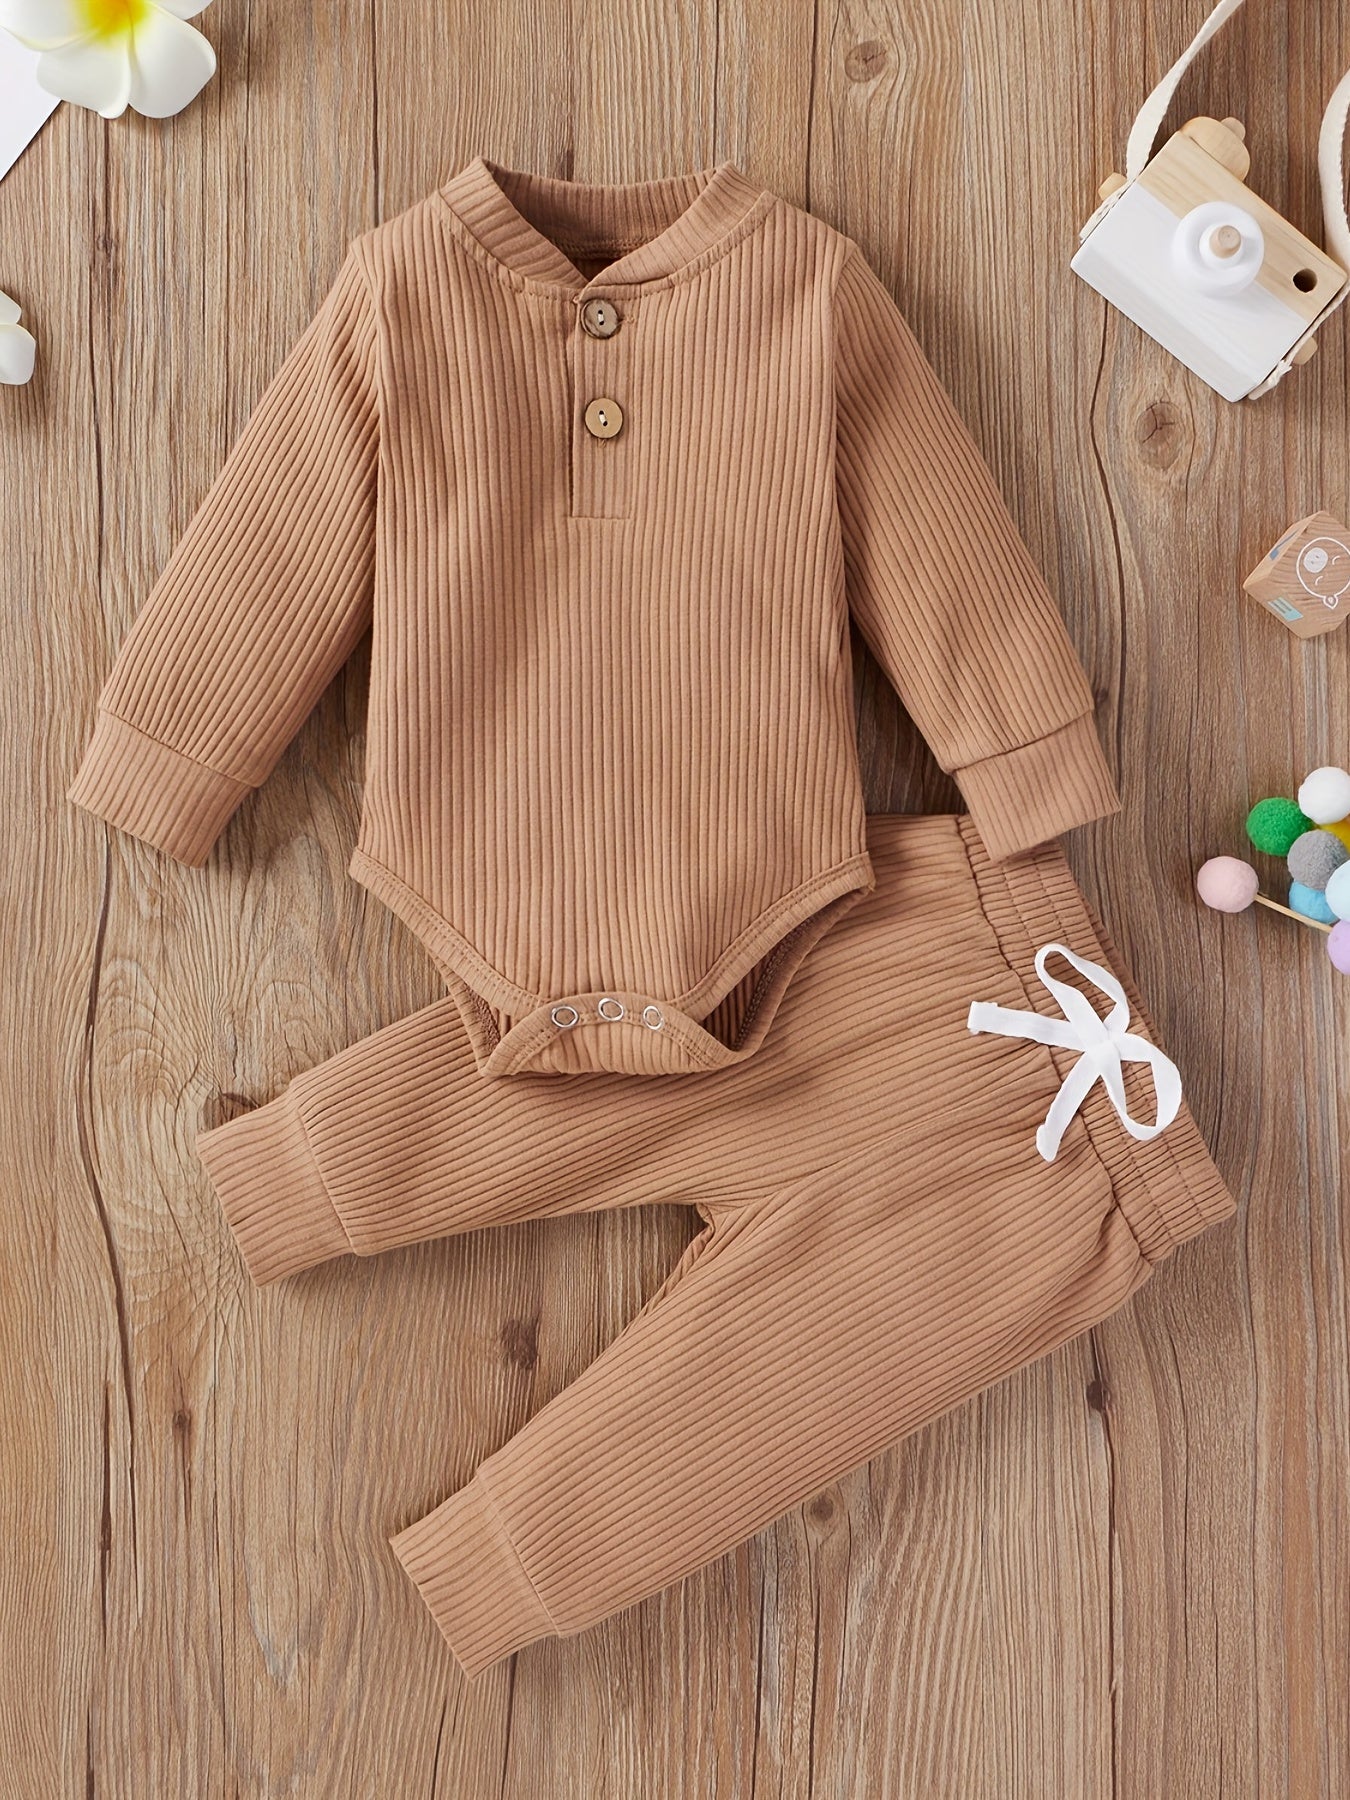 2pcs Baby Infant Boys And Girls Casual Plain Color Long Sleeve Onesie & Pants Set Clothes